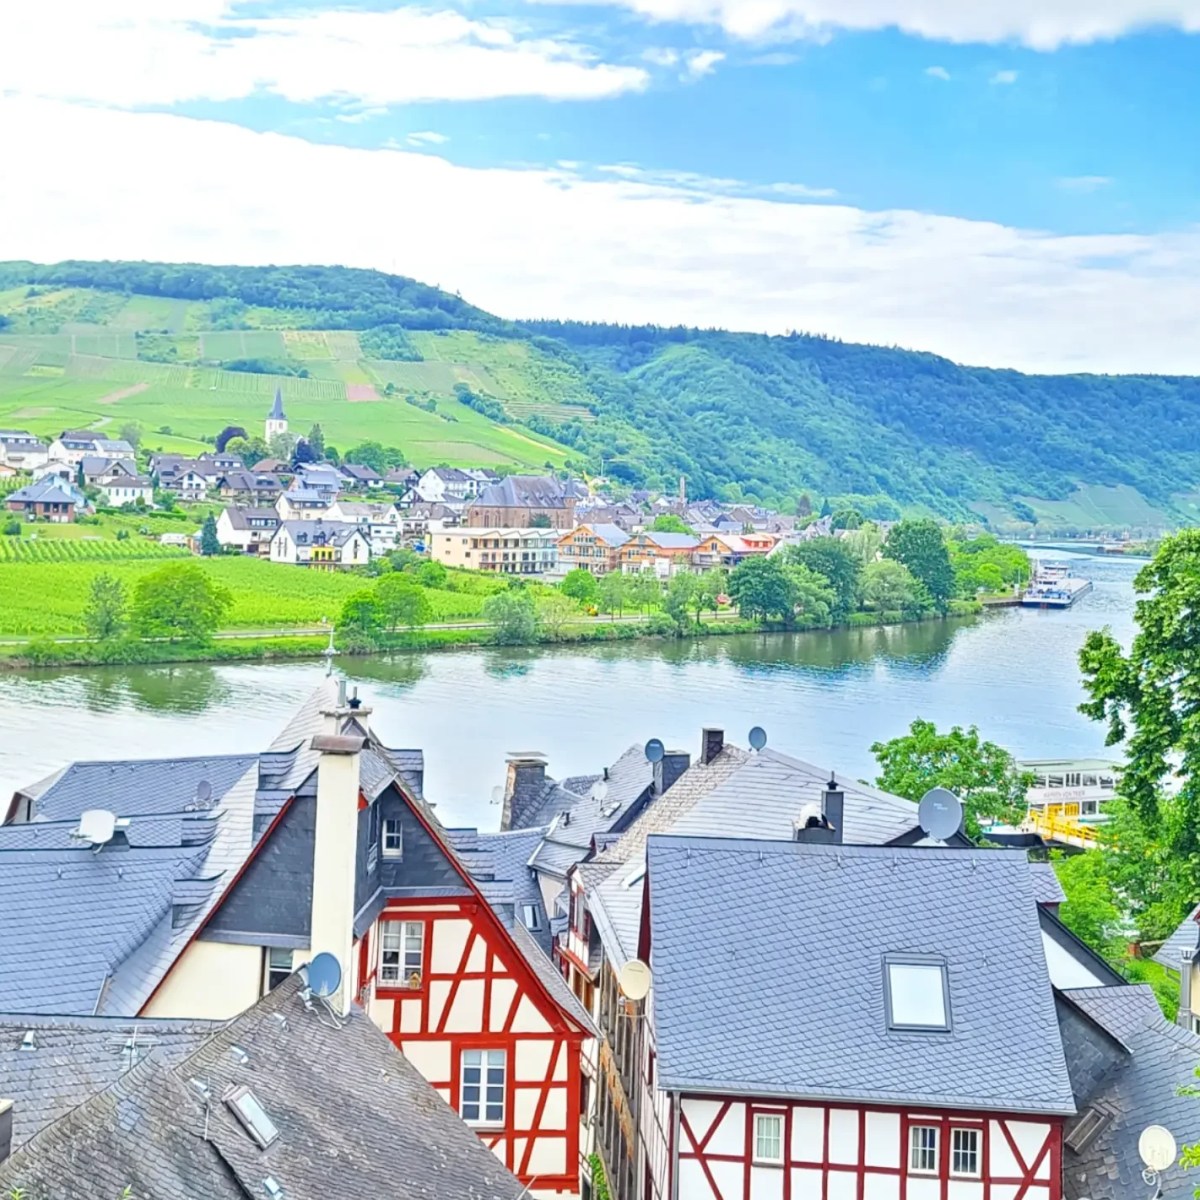 Things to Do in Beilstein, Germany